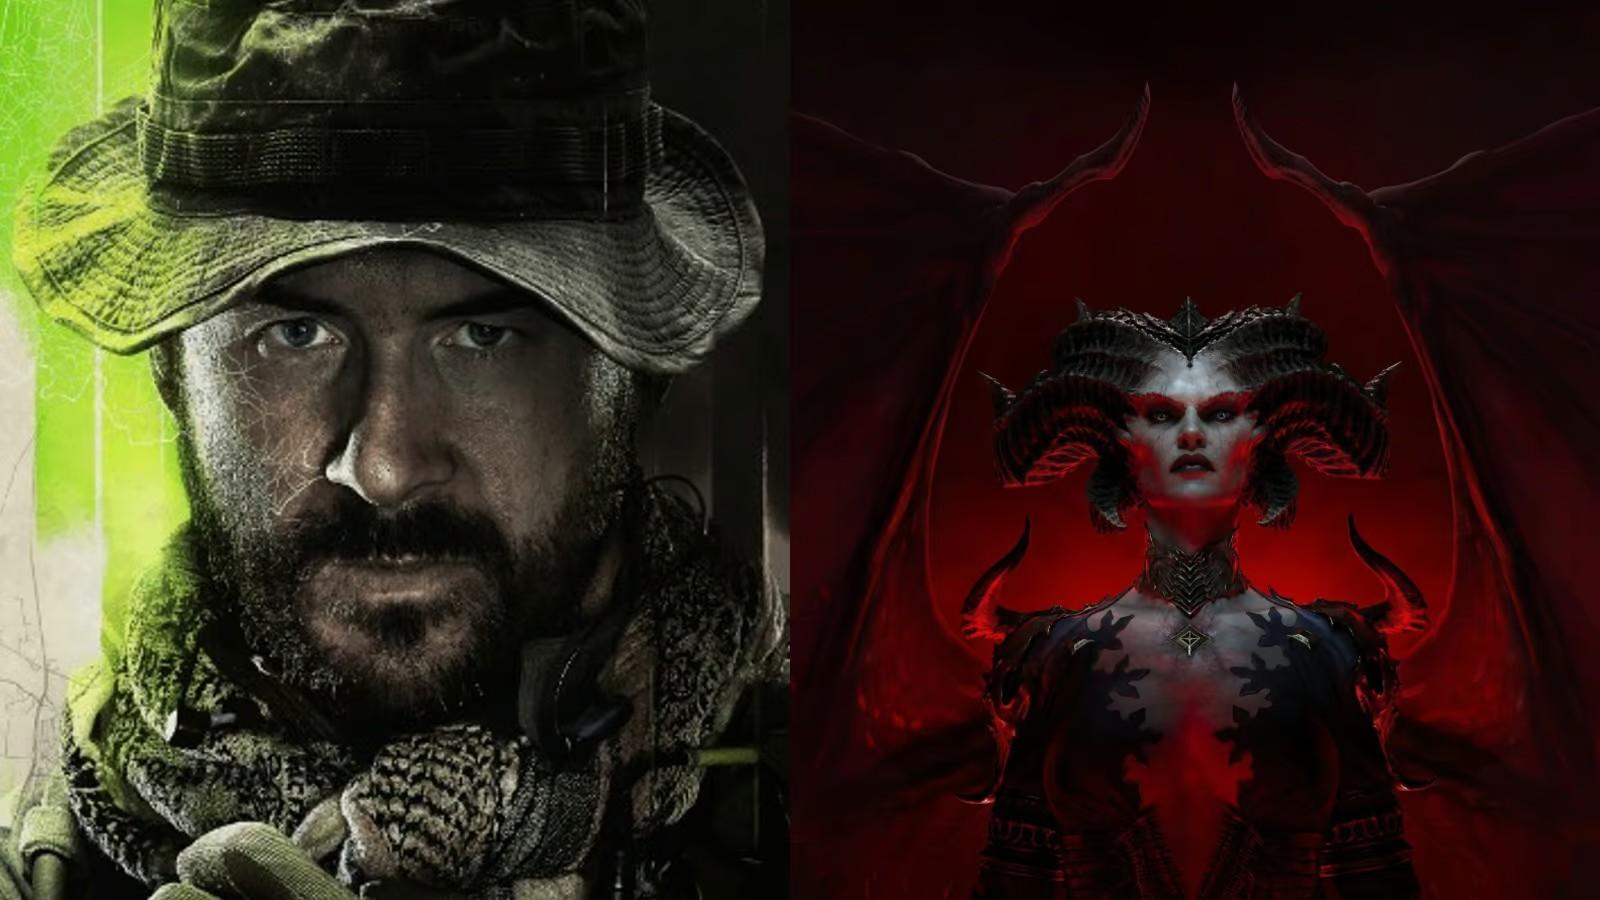 Price and Lilith from MW2 and Diablo IV